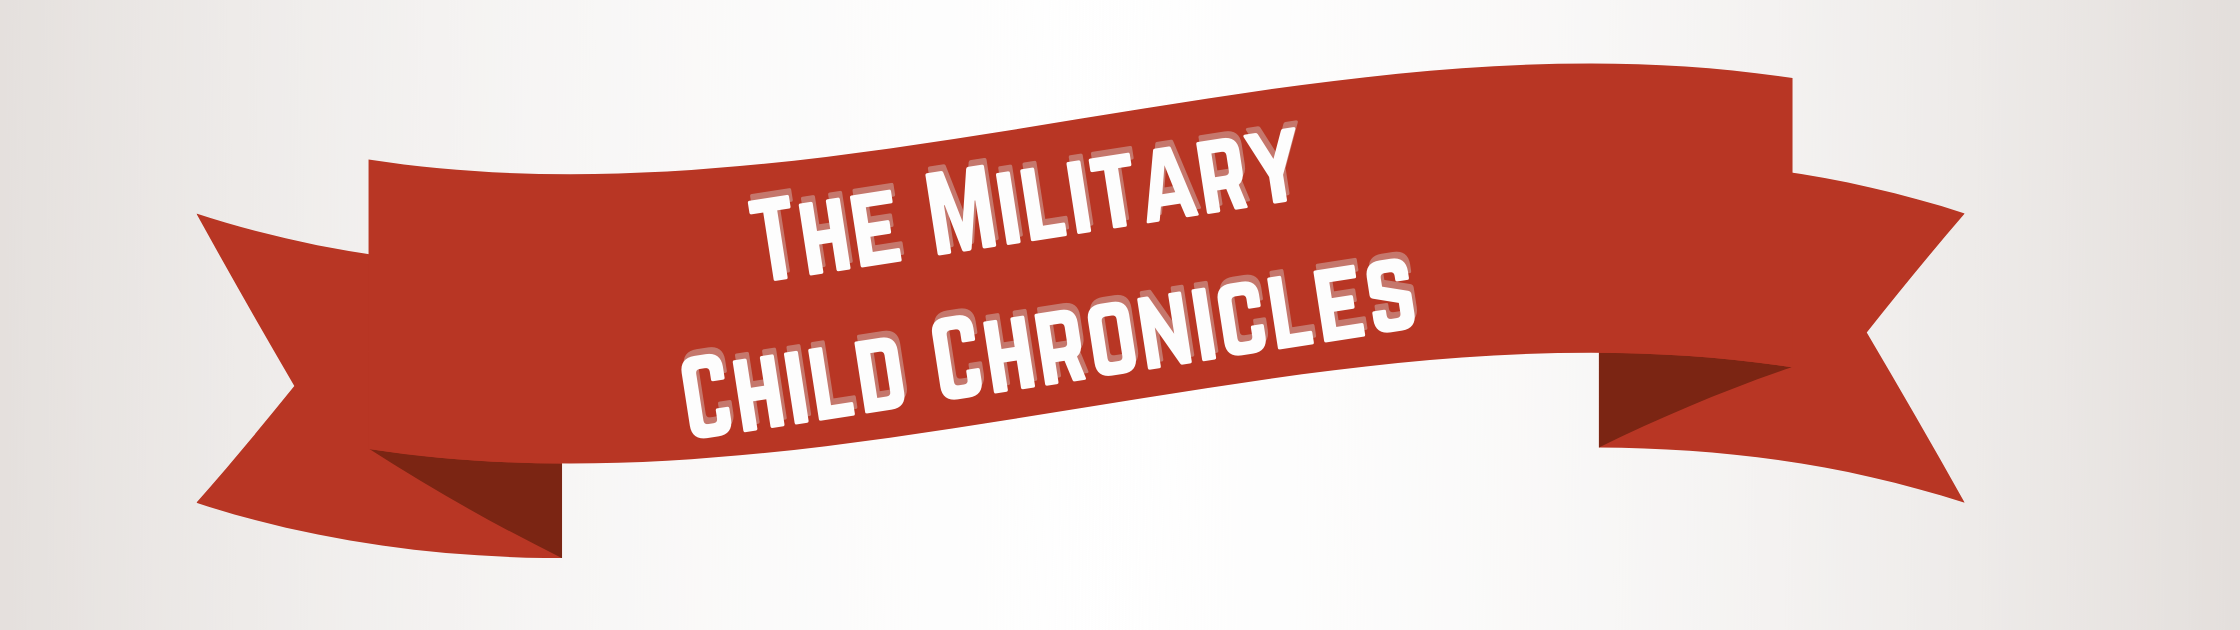 The Military Child Chronicles on a red banner